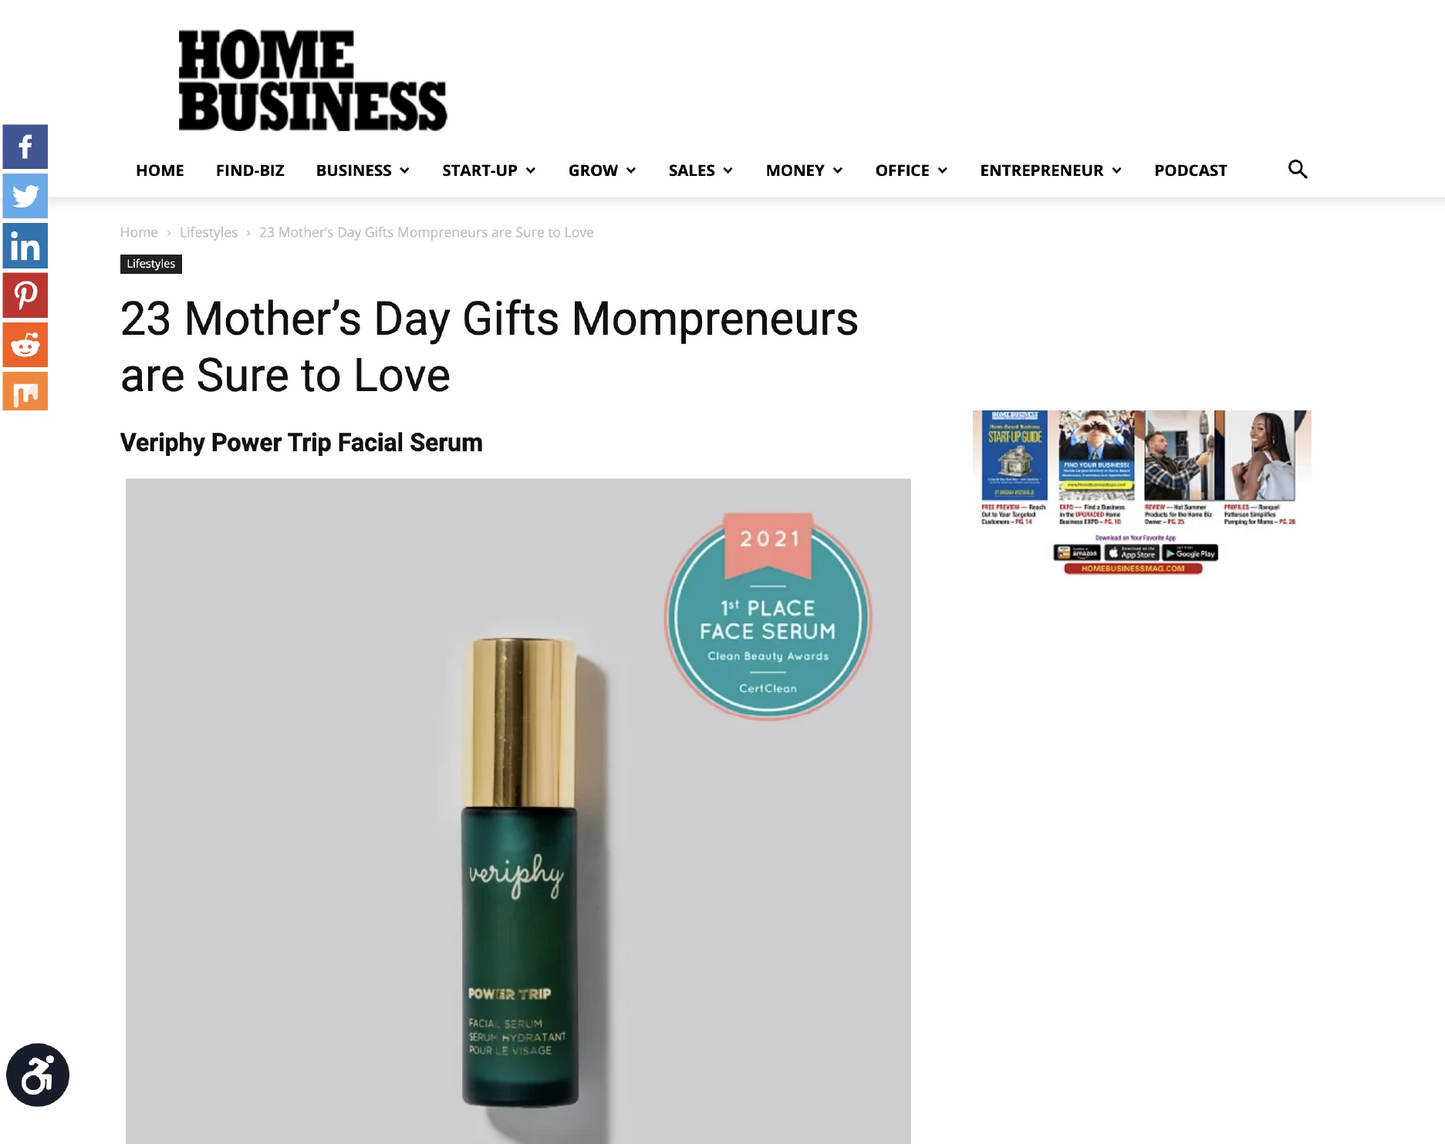 Veriphy Skincare Featured In Home Business Magazine